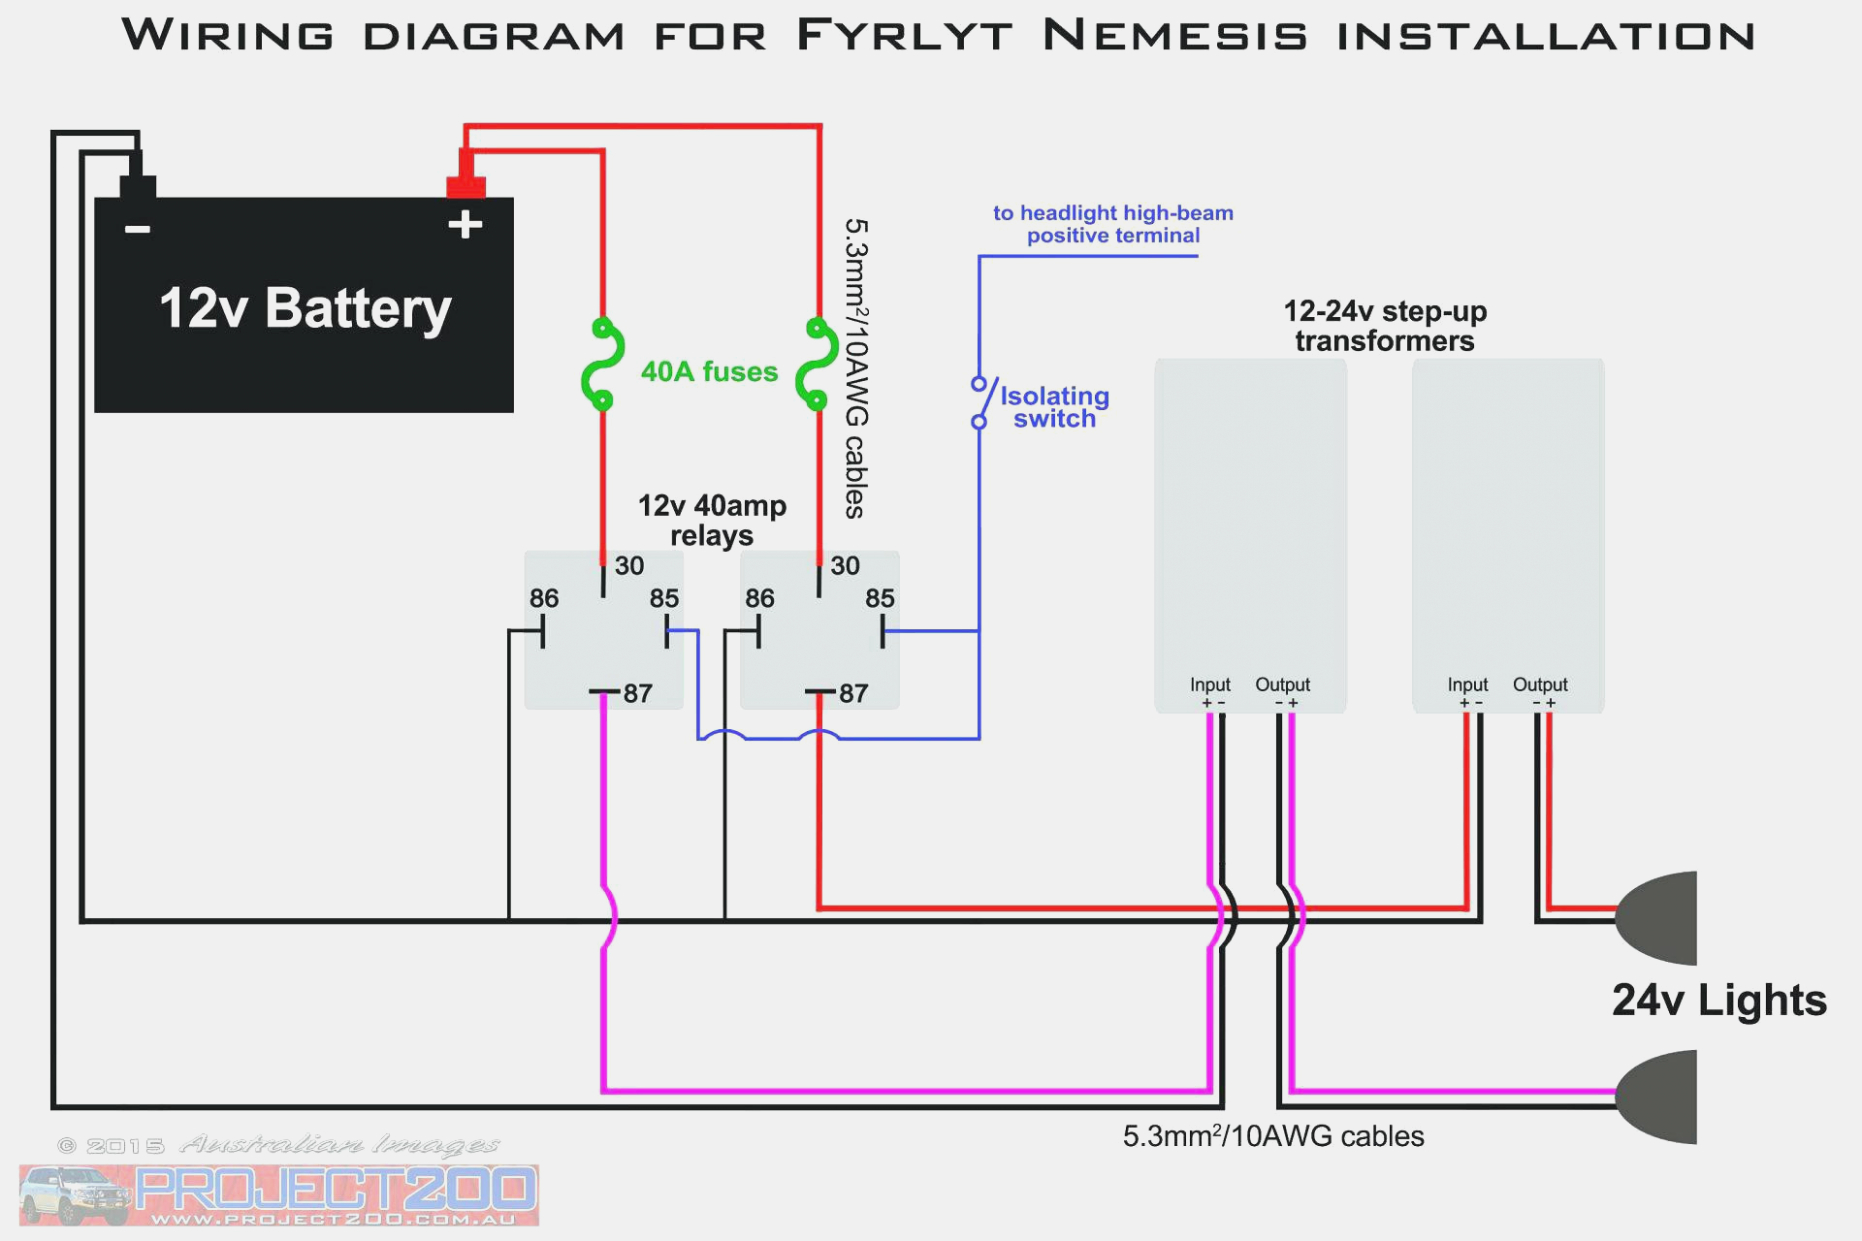 Basic Schematic For Typical Pool Light Wiring | Wiring Diagram - Pool Light Wiring Diagram